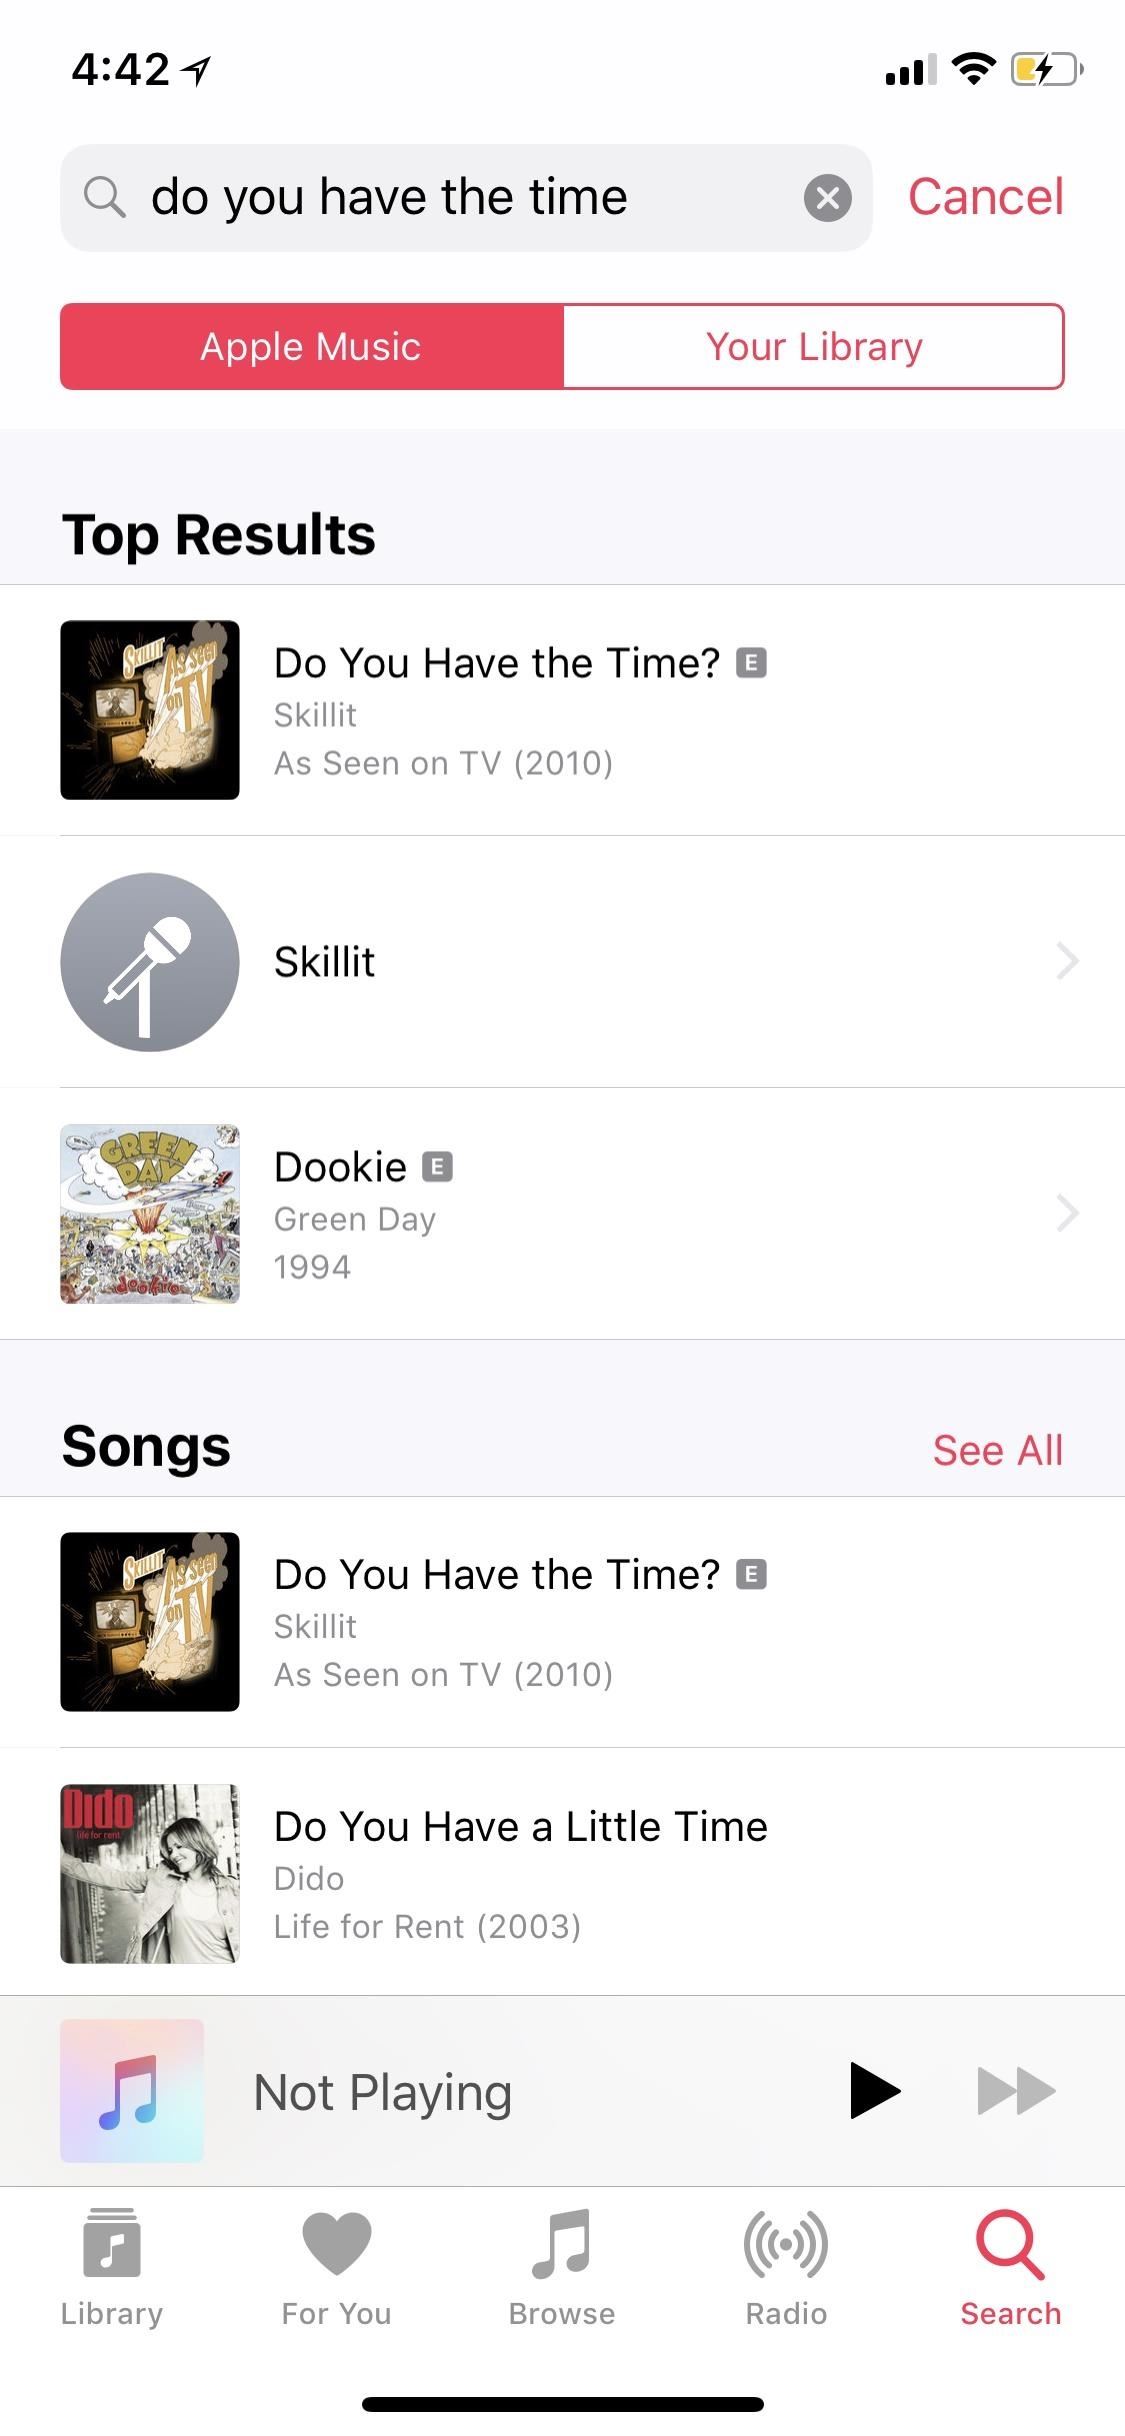 How to Find Songs by Lyrics in Apple Music for iOS 12 — With or Without a Subscription